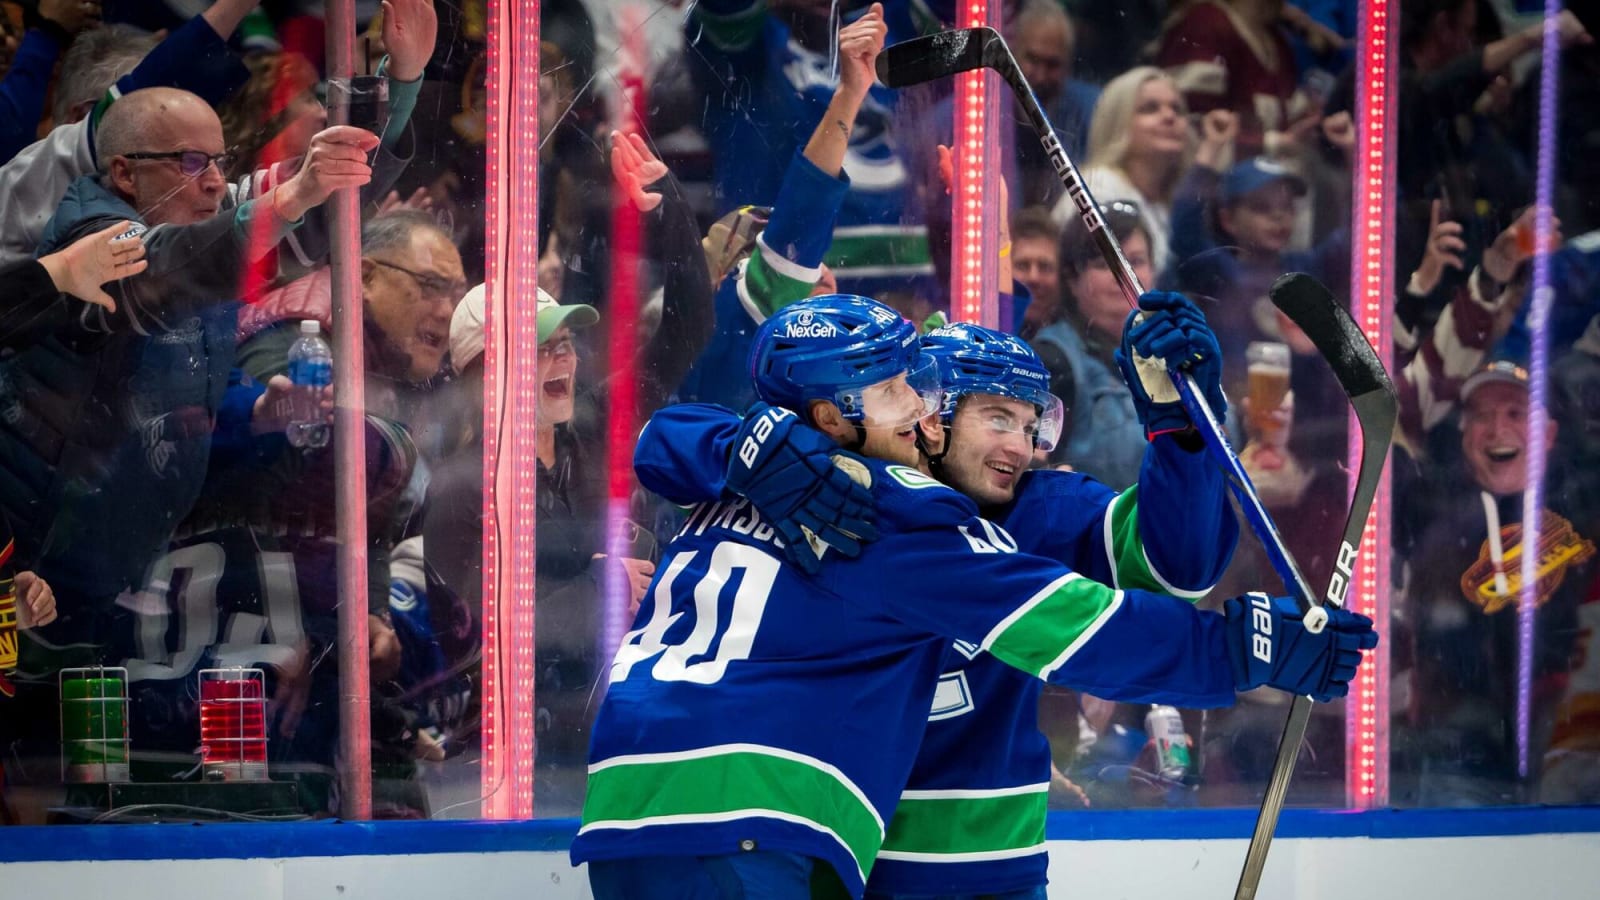 Projecting what changes Tocchet will make to the Canucks lineup ahead of crucial Game 5